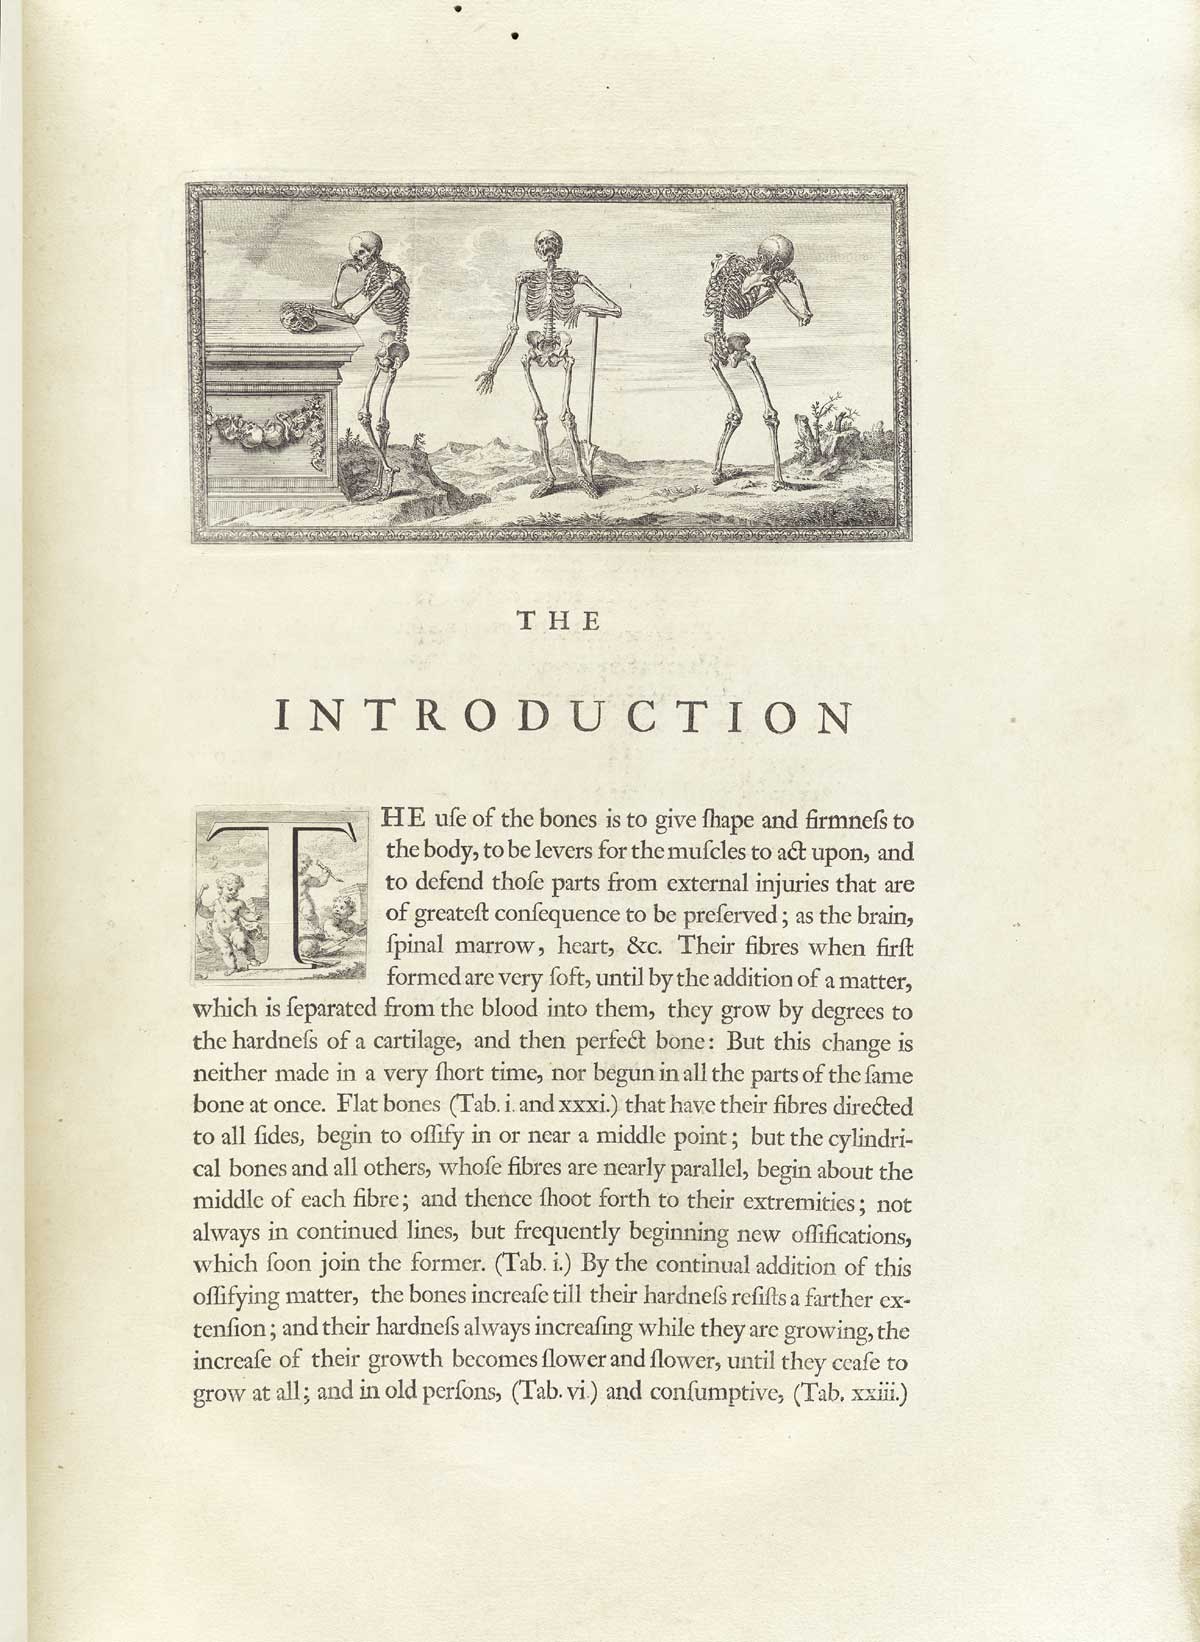 Typeset page of text with large engraved vignette at the top of the page showing three standing skeletons in classical poses: the one on the left contemplates a skull on a classical stone pediment; the middle one facing the viewer with a grim open mouth, leaning on a staff with his left hand; the third on the right is hunched over facing the right as if weeping with his face away from the viewer, mostly showing the rear view; from William Cheselden’s Osteographia, NLM Call no.: WZ 260 C499o 1733.